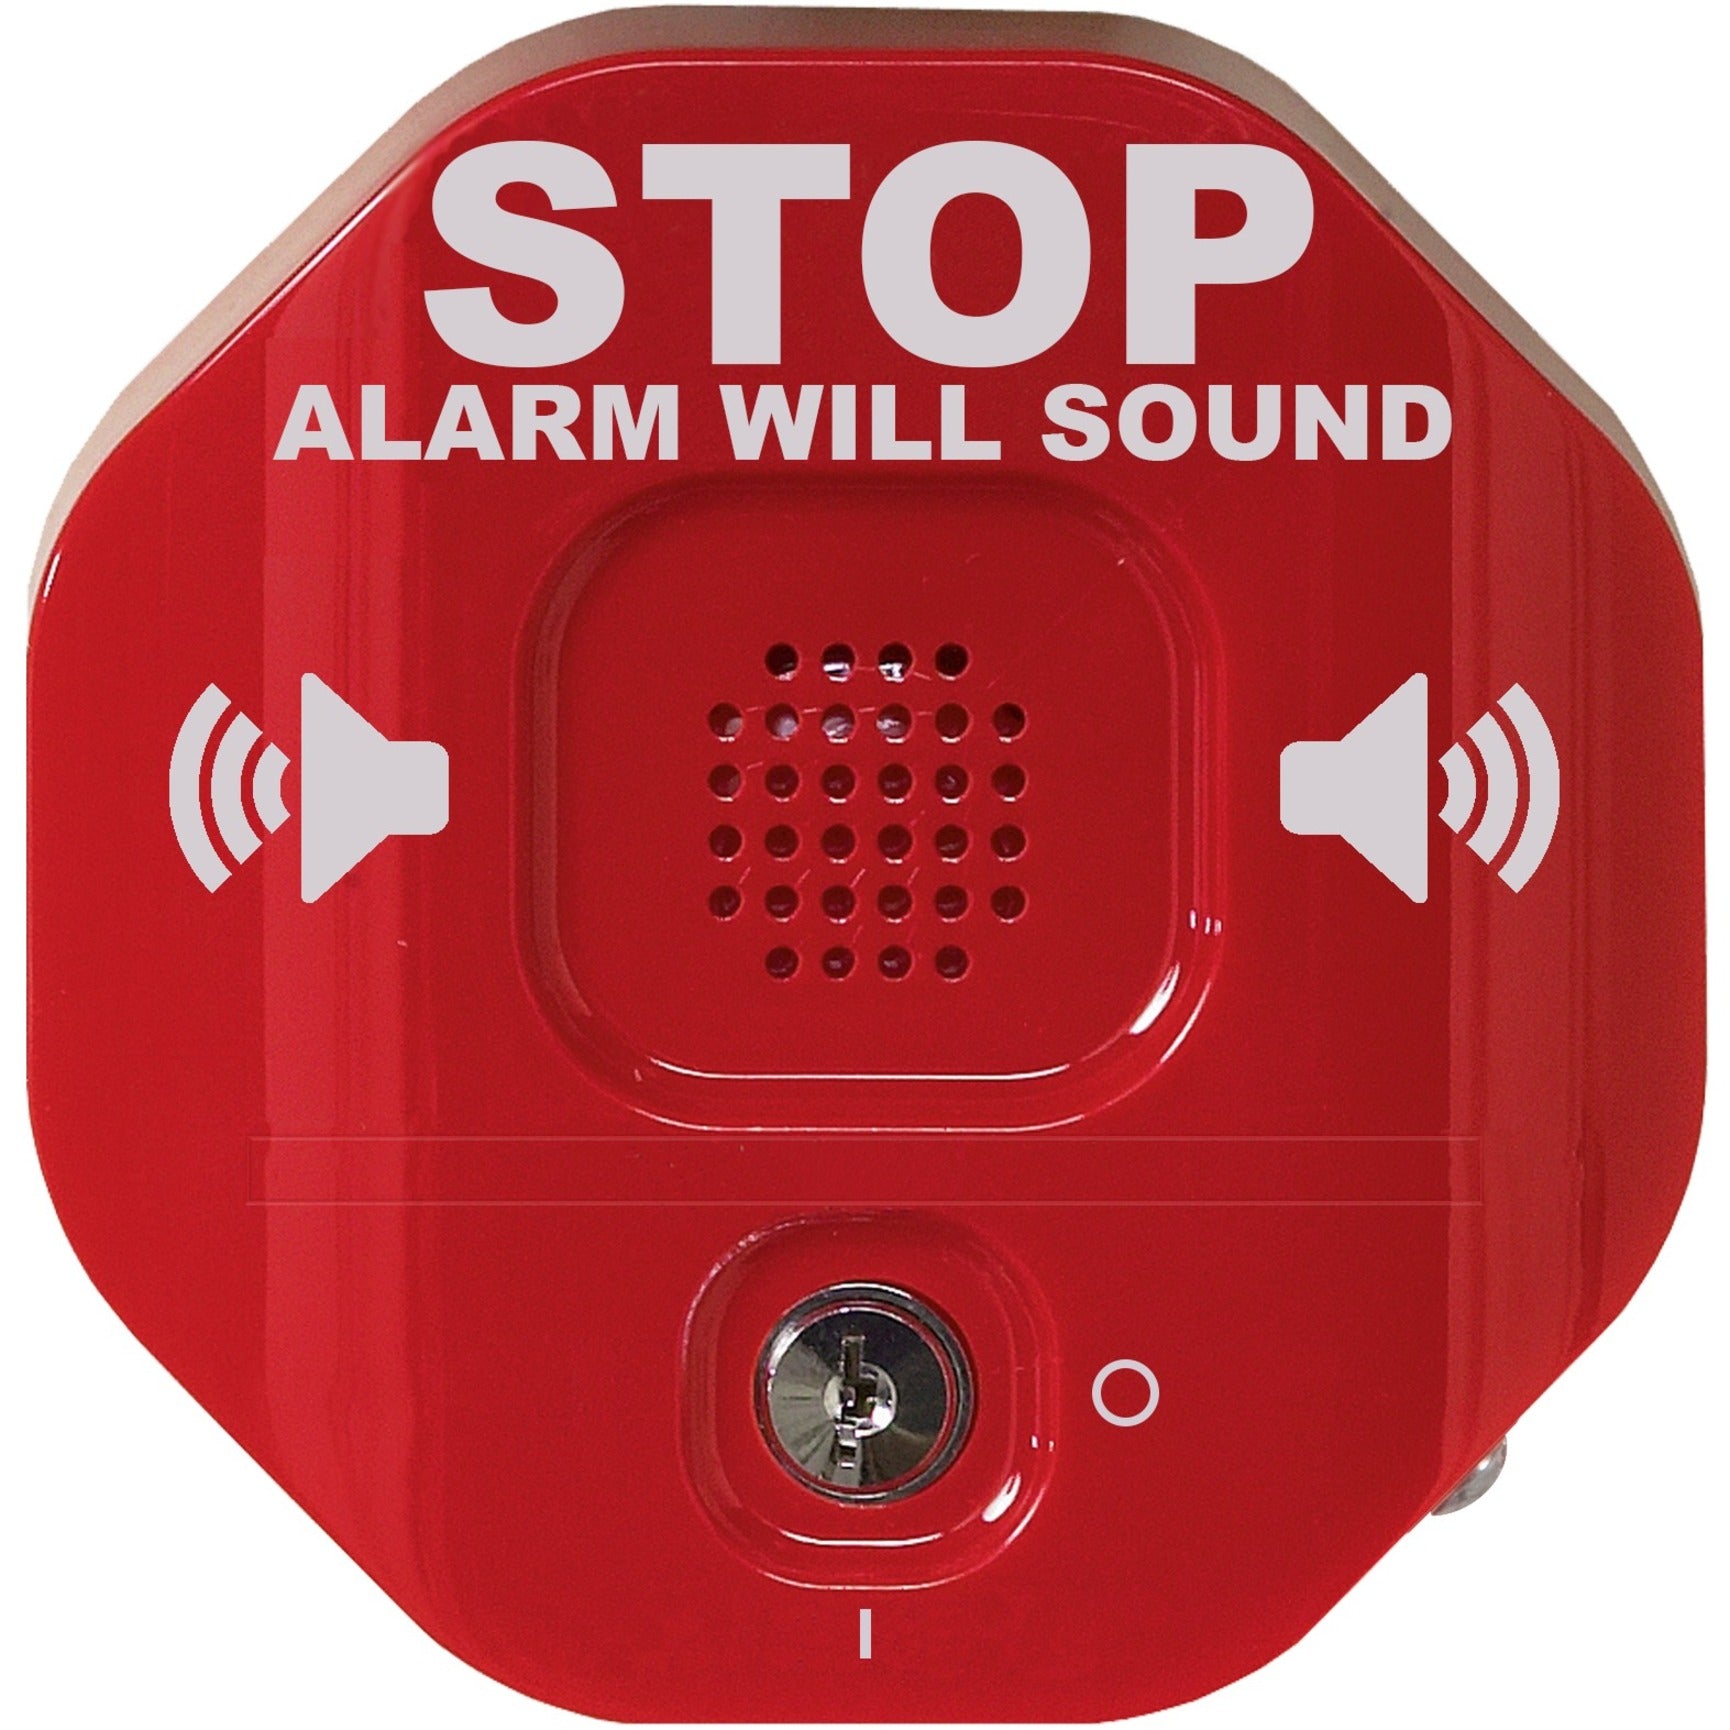 STI STI-6400 Exit Stopper Multifunction Door Alarm, Highly Visible Deterrent, Battery Powered